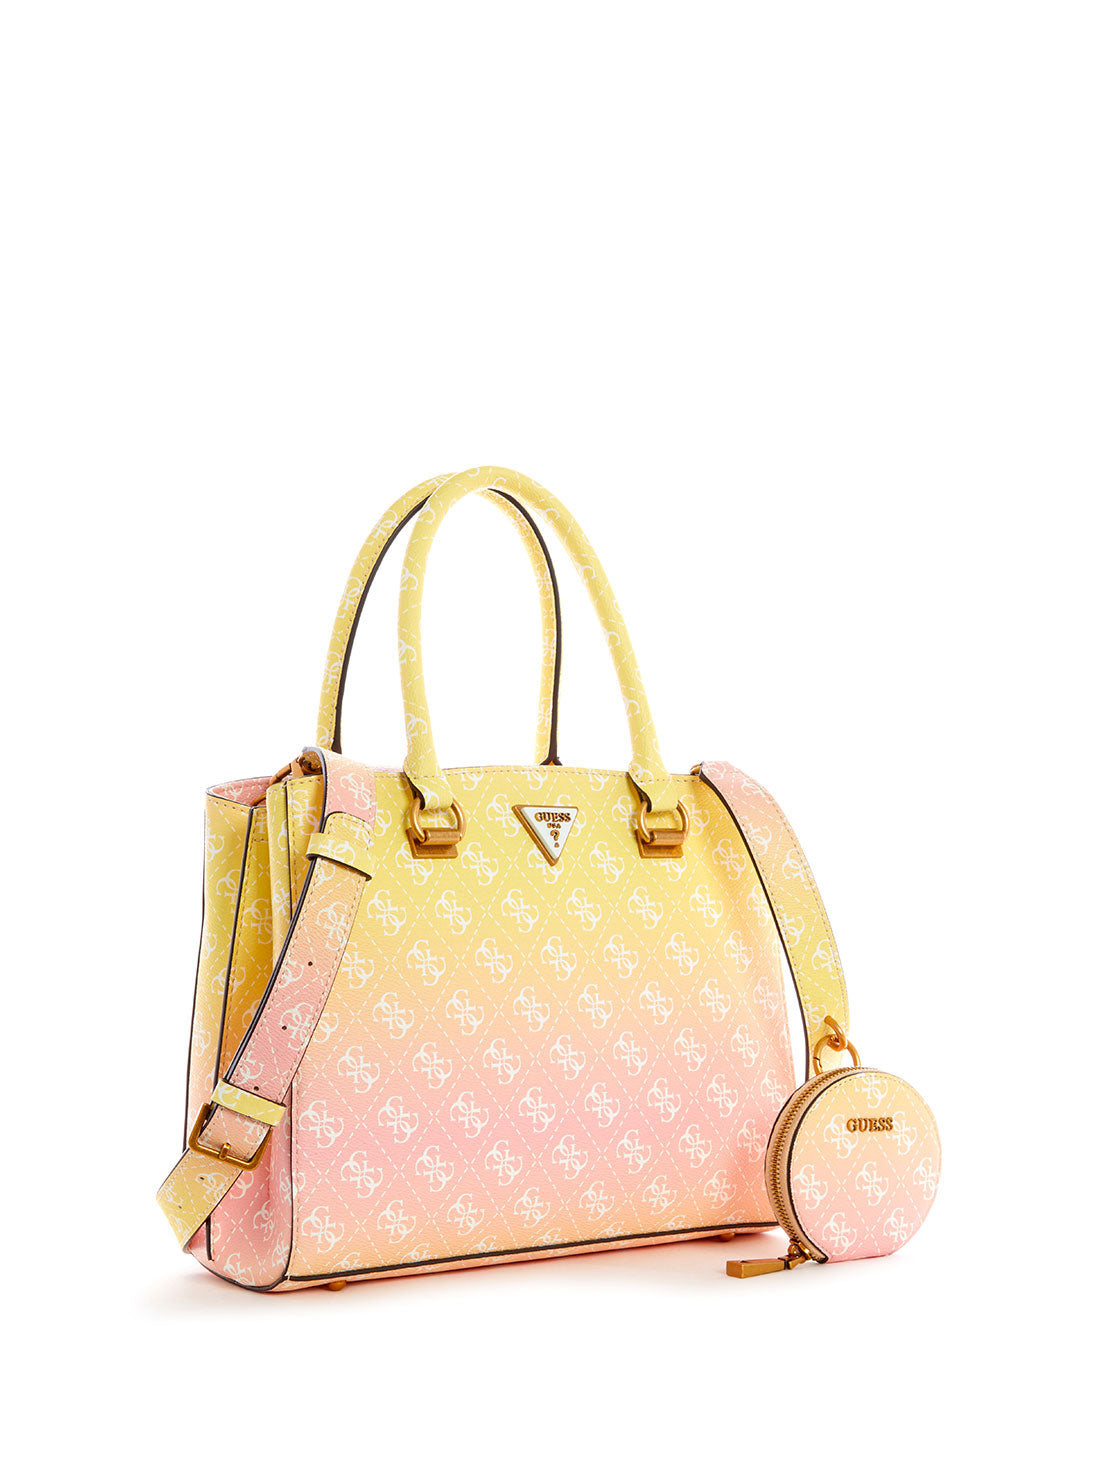 GUESS Women's Yellow Ombre Alexie Girlfriend Satchel SB841606 Front Side View